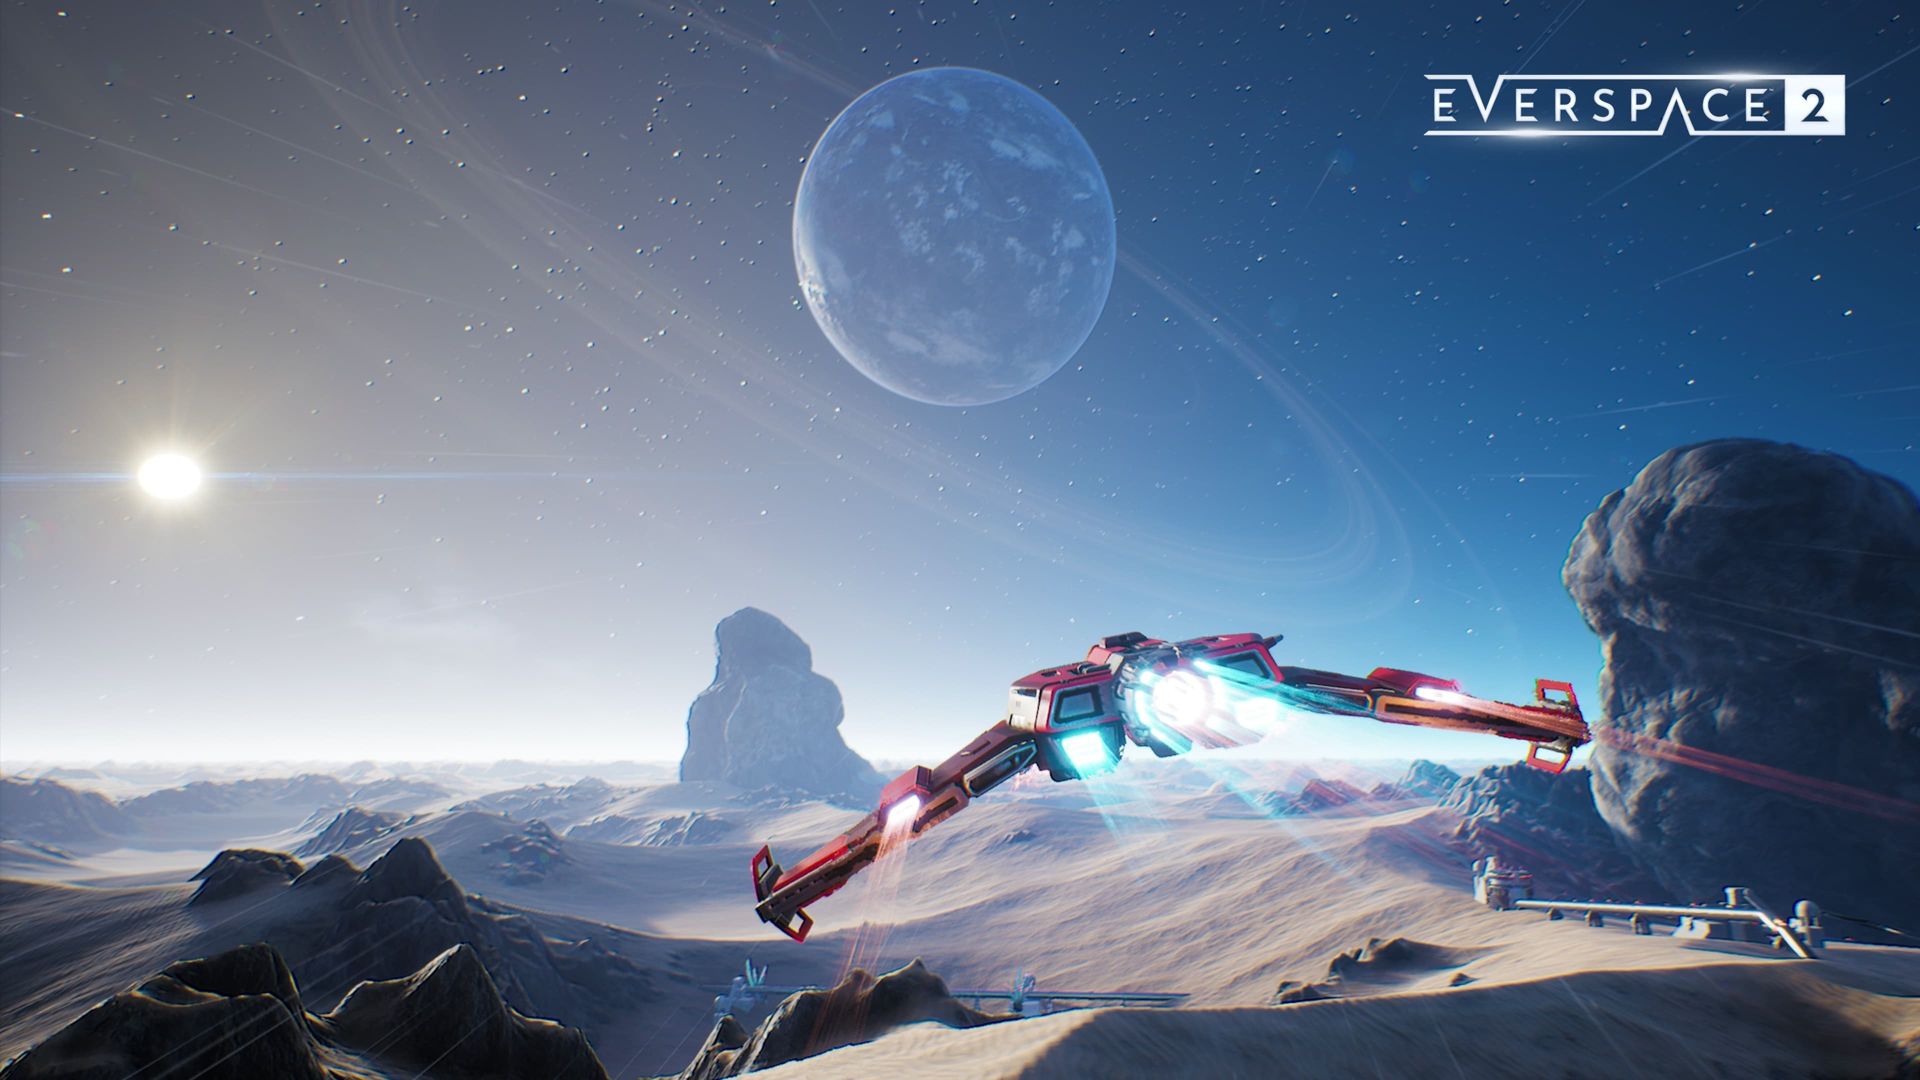 Una nave spaziale in volo in Everspace 2